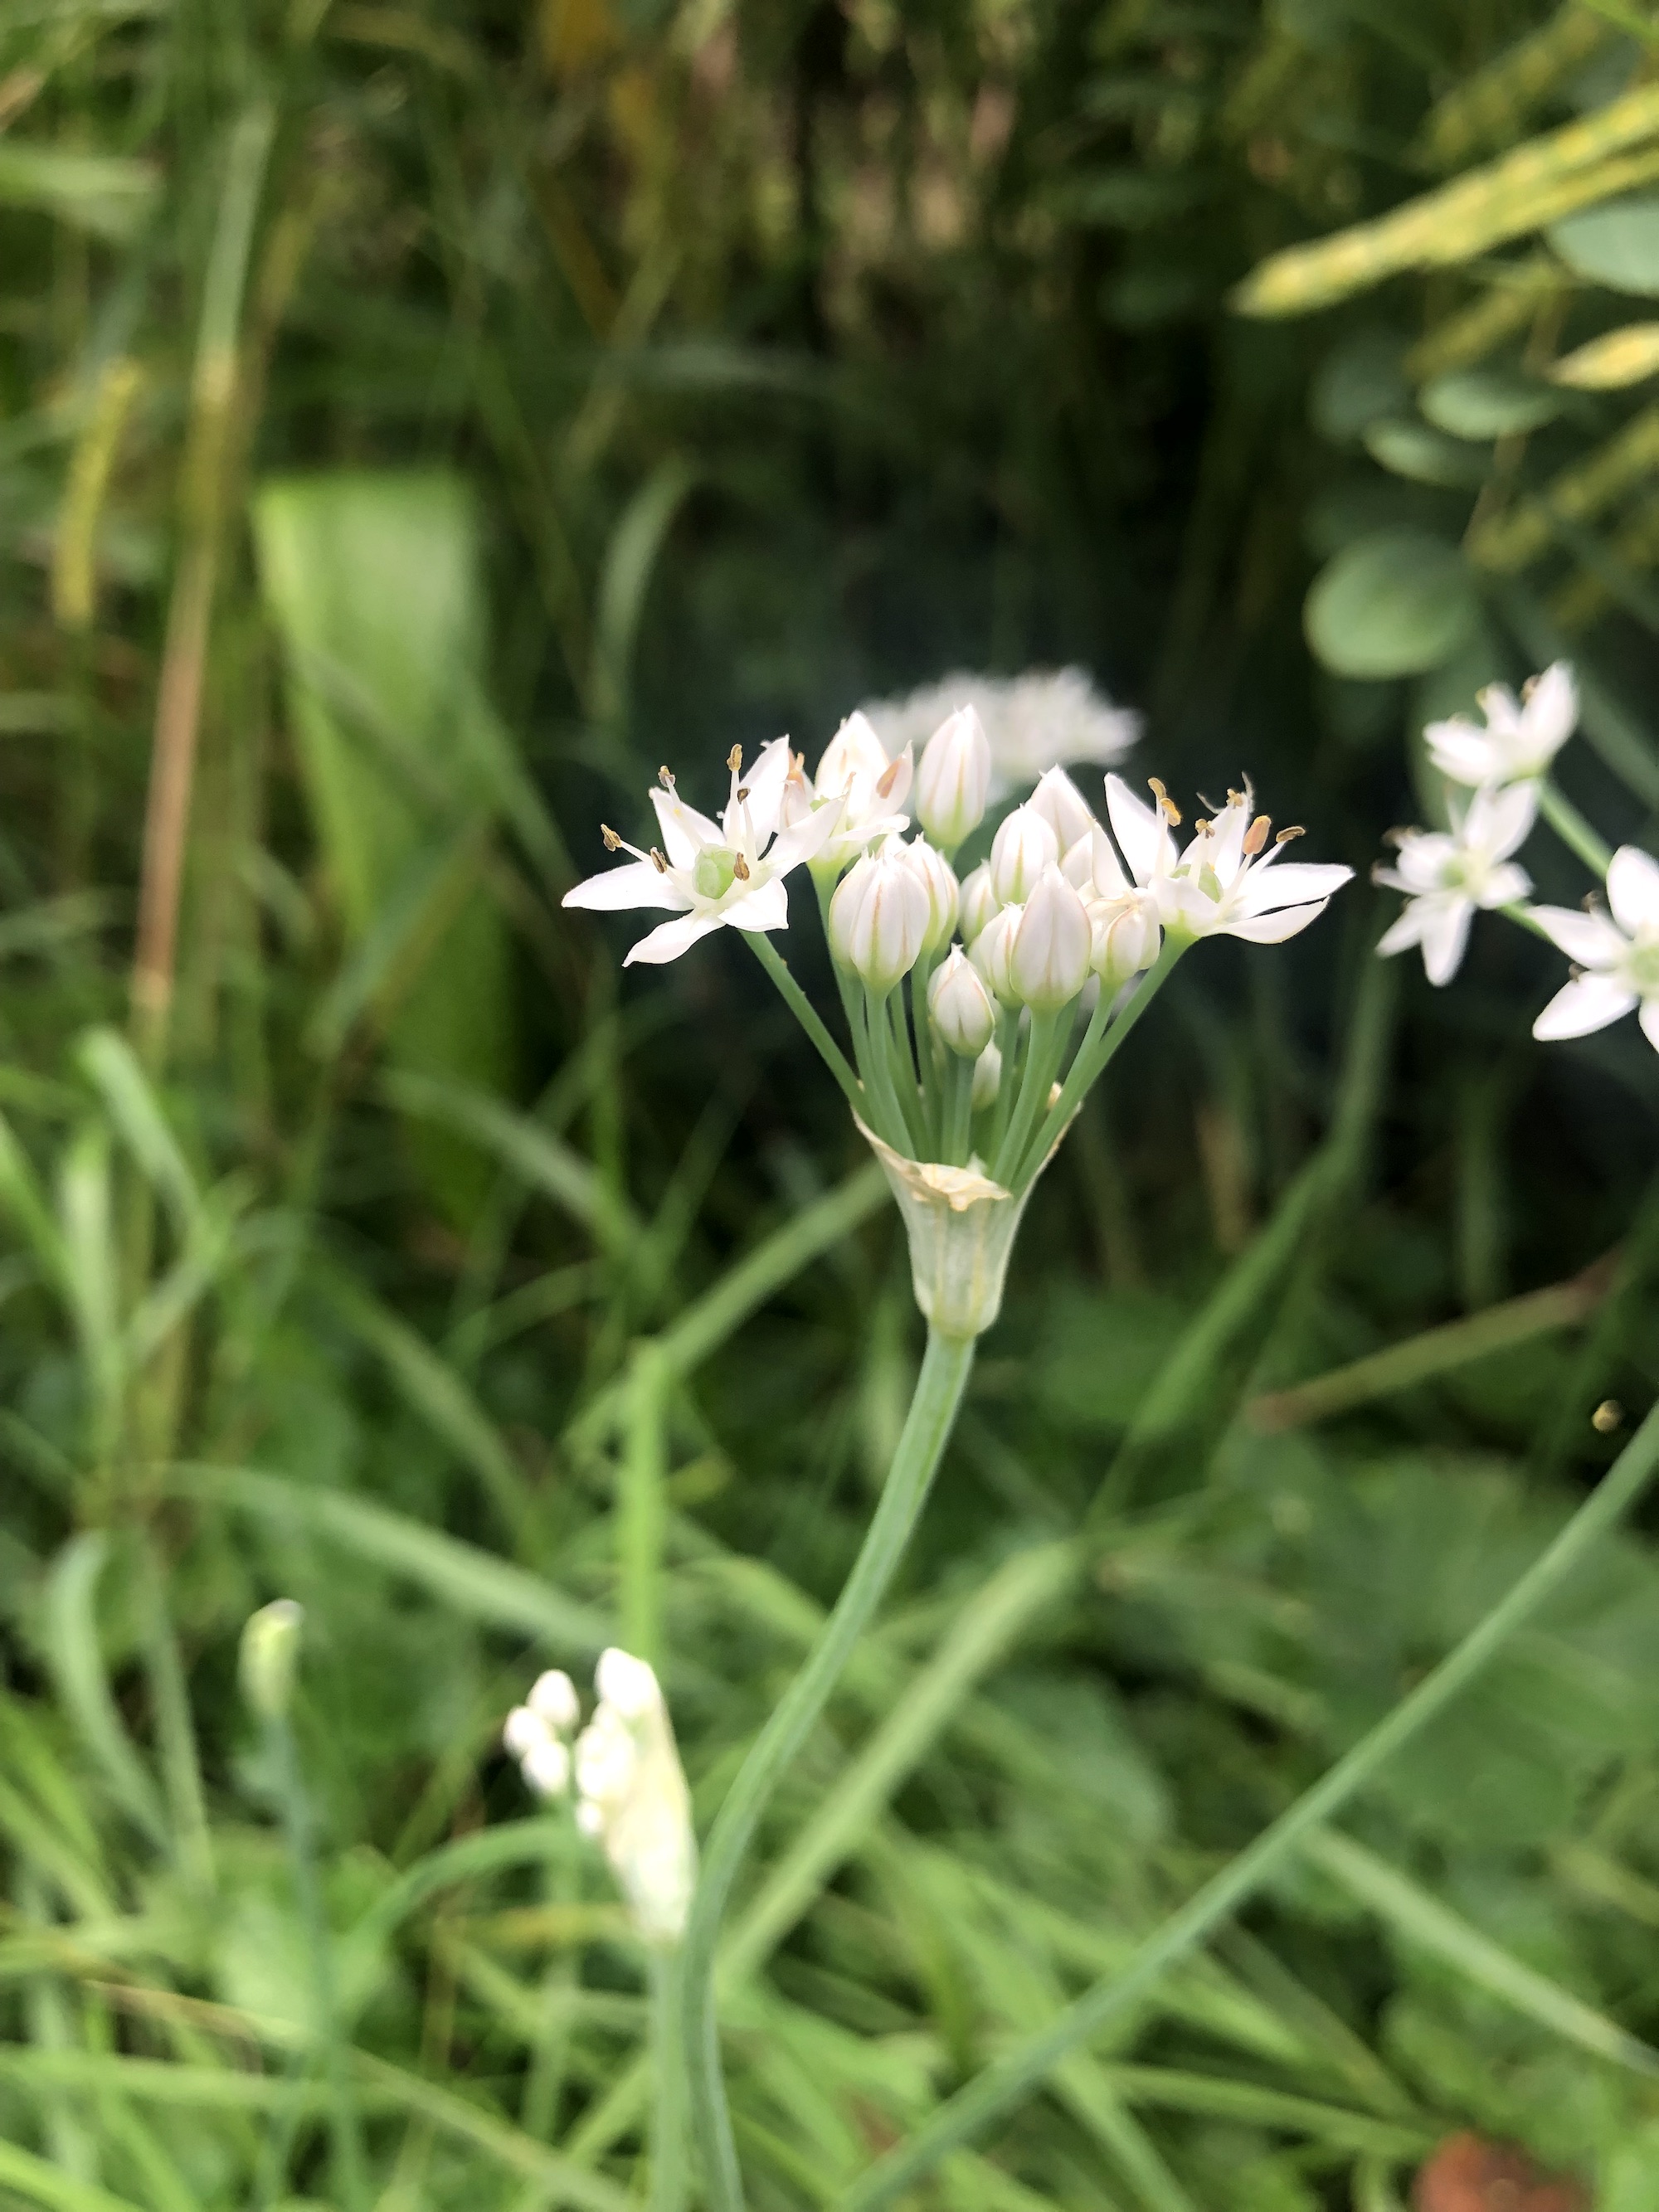 Garlic Chives in ditch along bikepath behind Fox Avenue in Madison, Wisconsin on September 5, 2022.